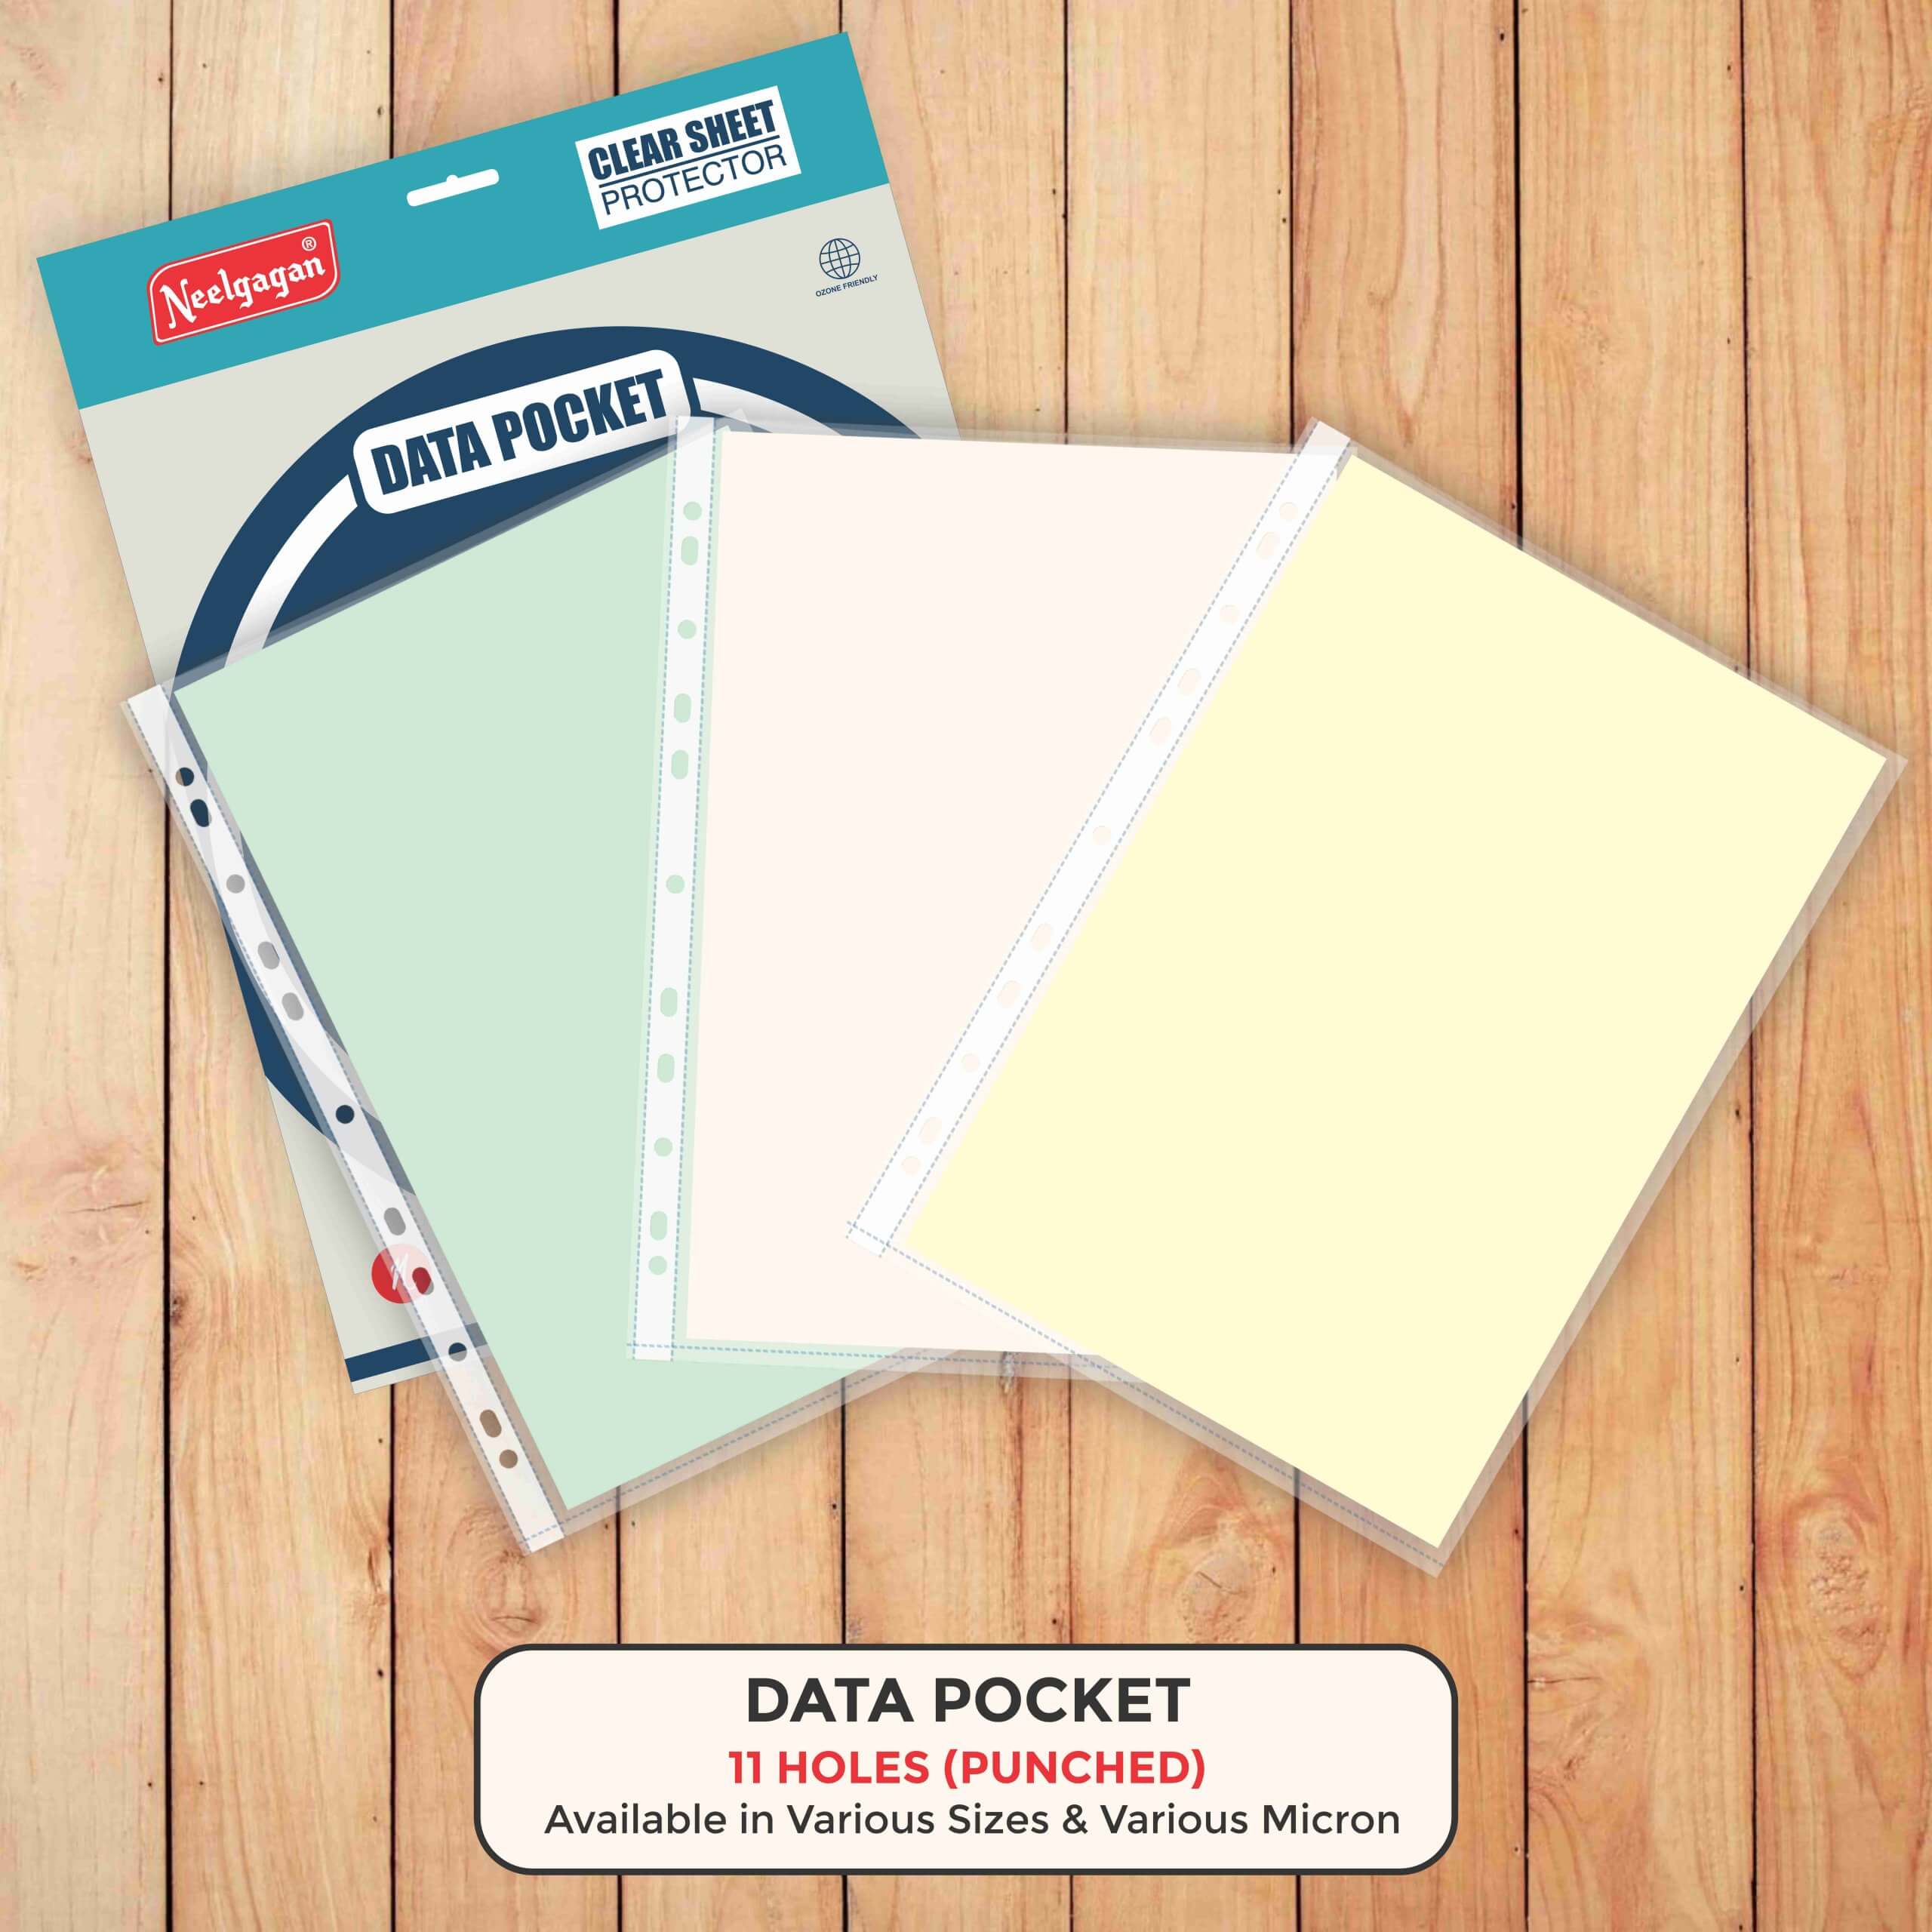 Data Pocket F/S (23.3cm x 34.8cm) Sheet Protector/Transparent Documents Sleeve (11-Holes Punched)